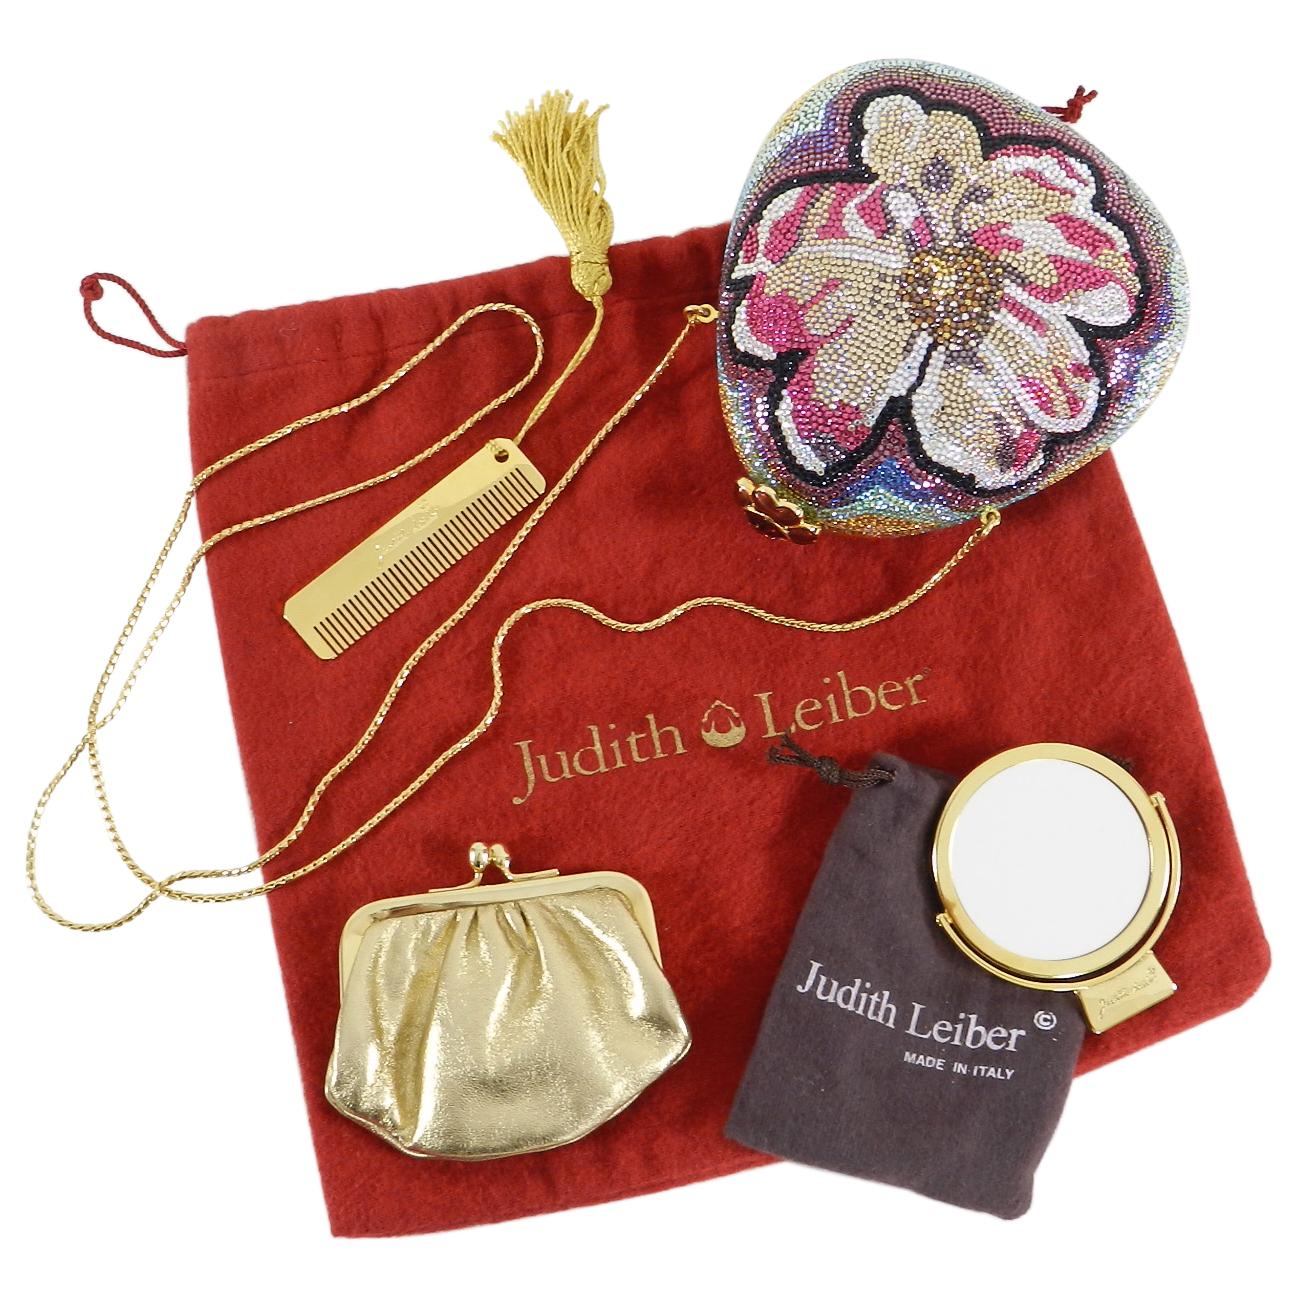 Judith Leiber Flower Jewelled Strass Minaudiere Evening Bag.  Enamel flower push clasp opening, gold leather lined interior, long gold metal chain strap.  Includes signature comb, mirror, and coin pouch.  Duster included.  Measures 5 x 4.75 x 1.75”.